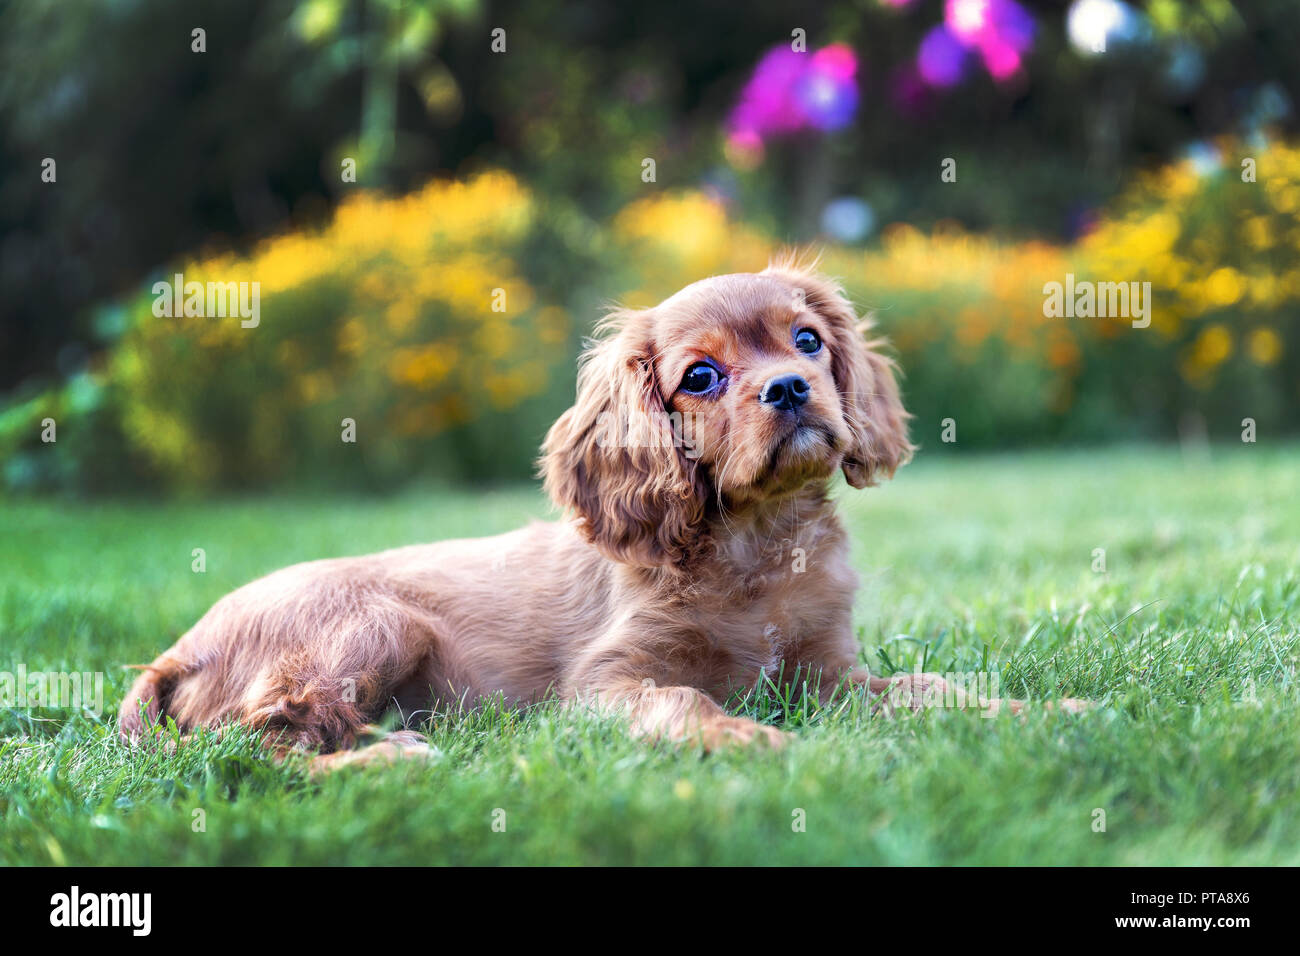 Adorable puppy lying on the green grass in the garden Stock Photo